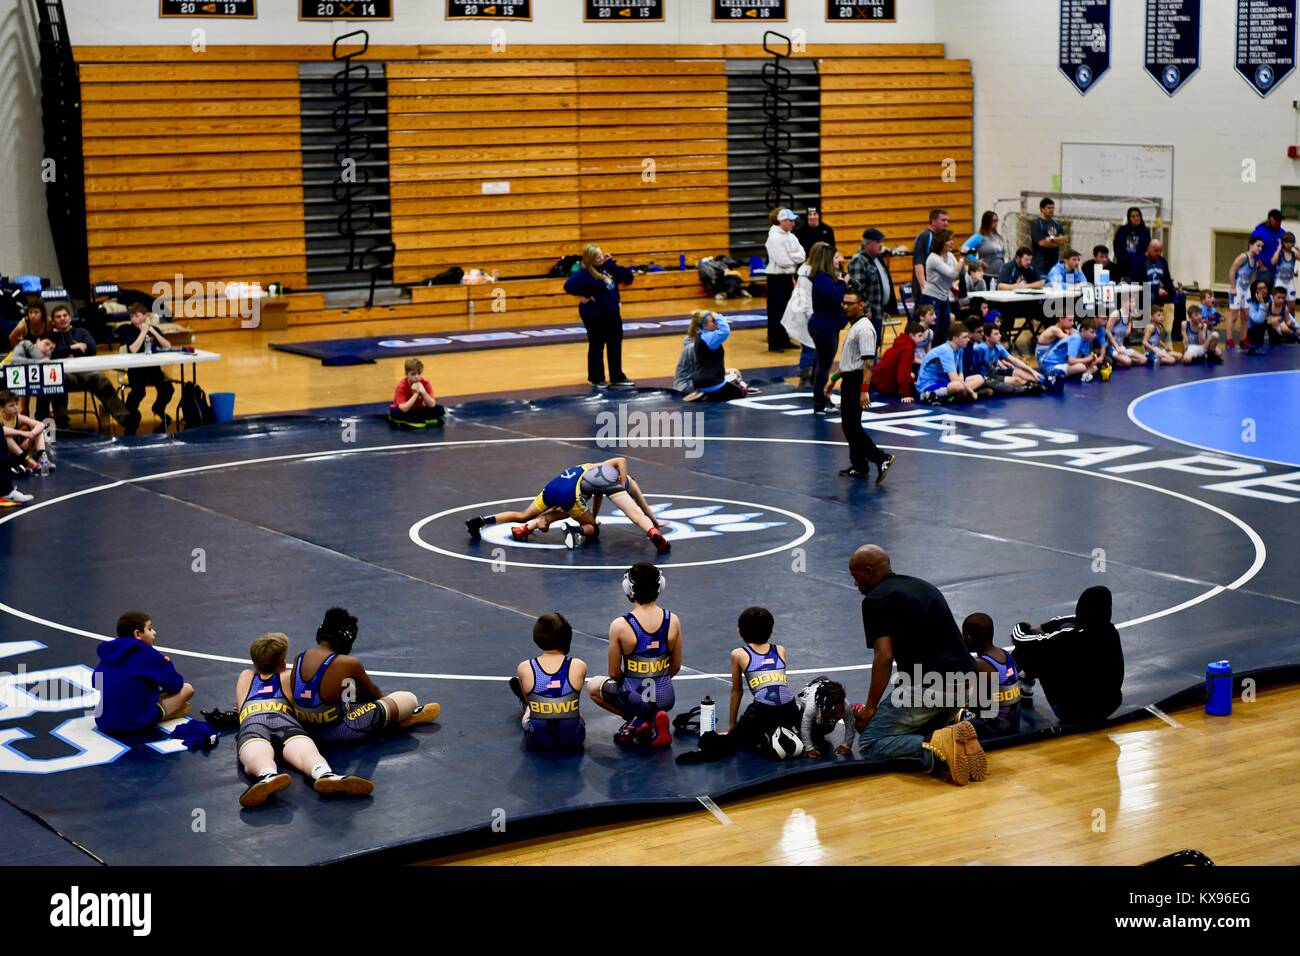 Collegiate style wrestling at the youth level, USA Stock Photo